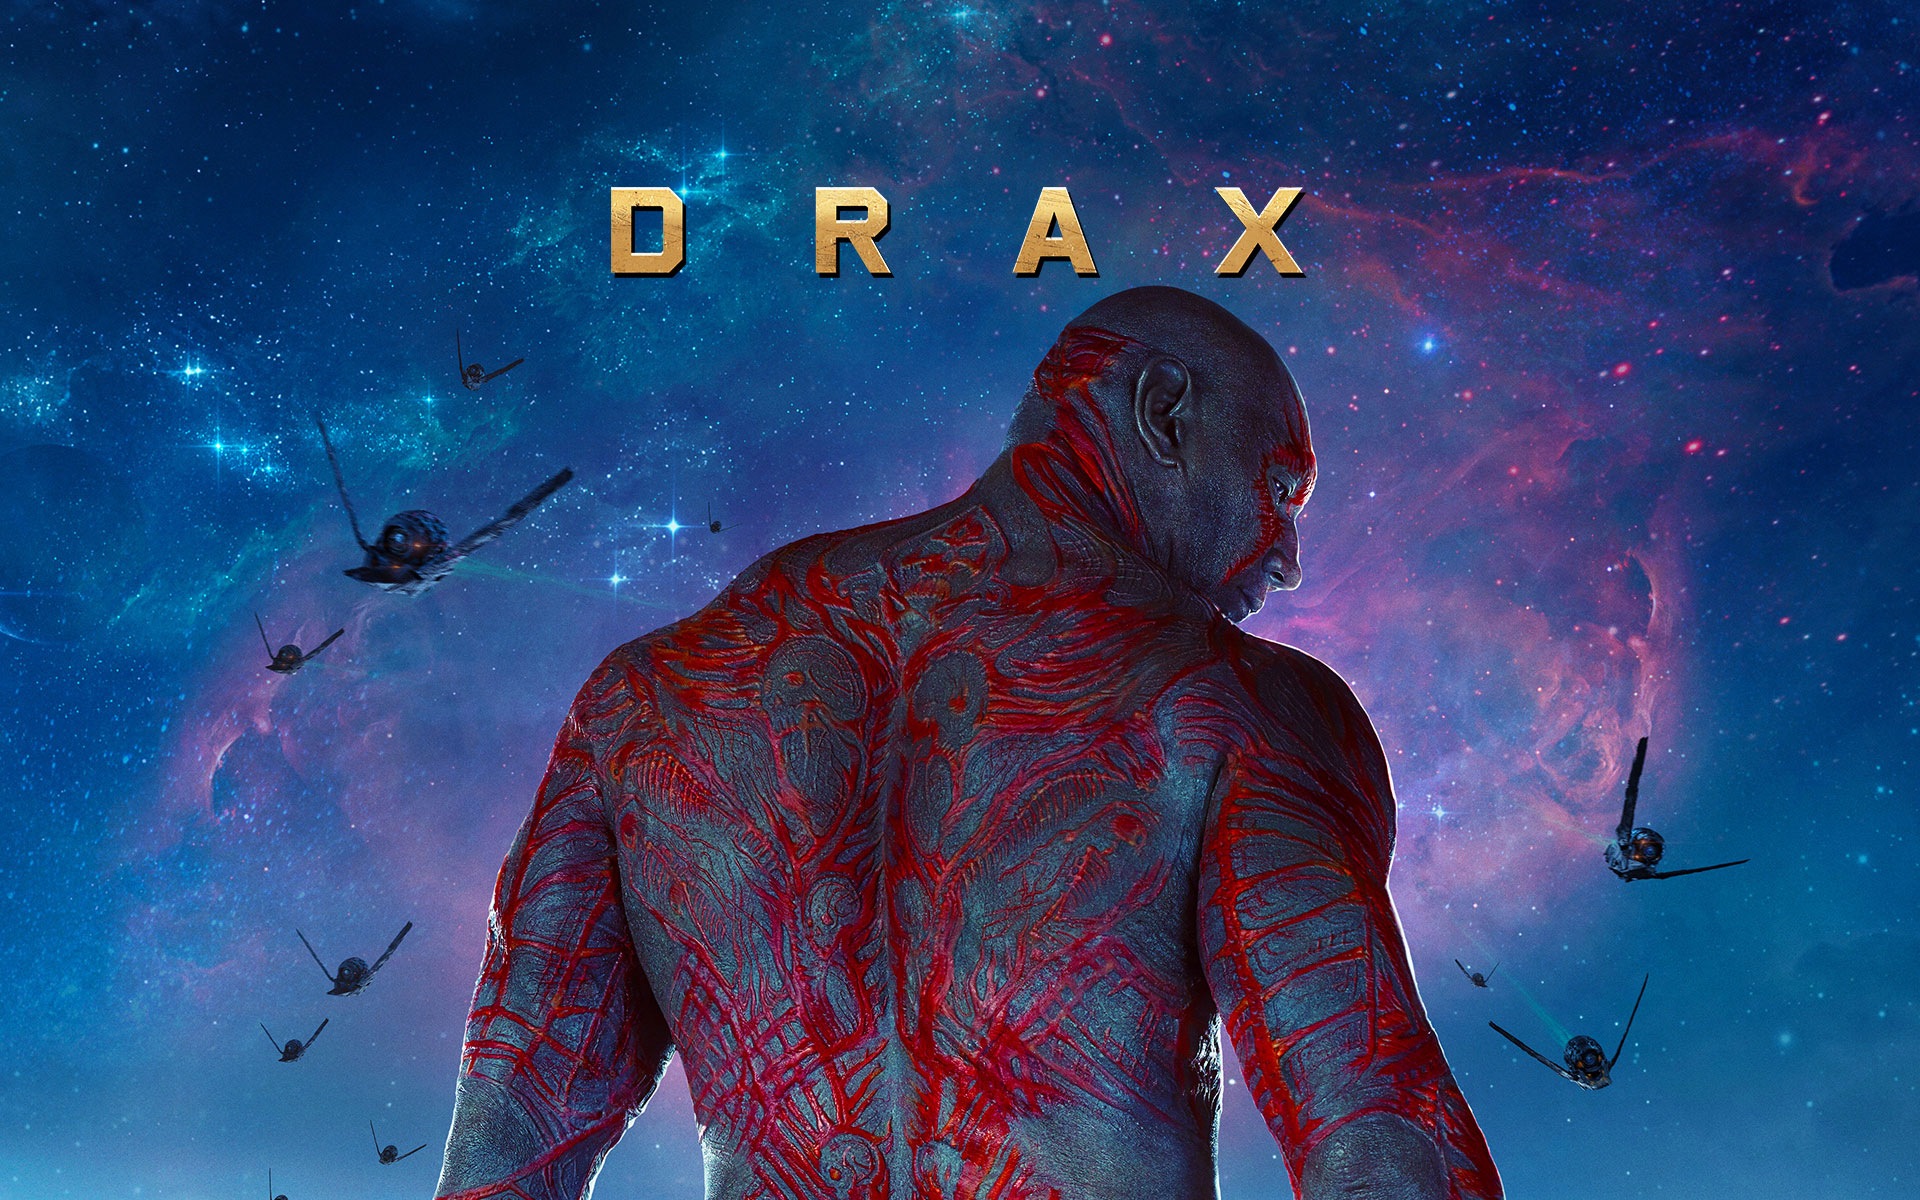 Guardians of the Galaxy 2014 HD movie wallpapers #6 - 1920x1200